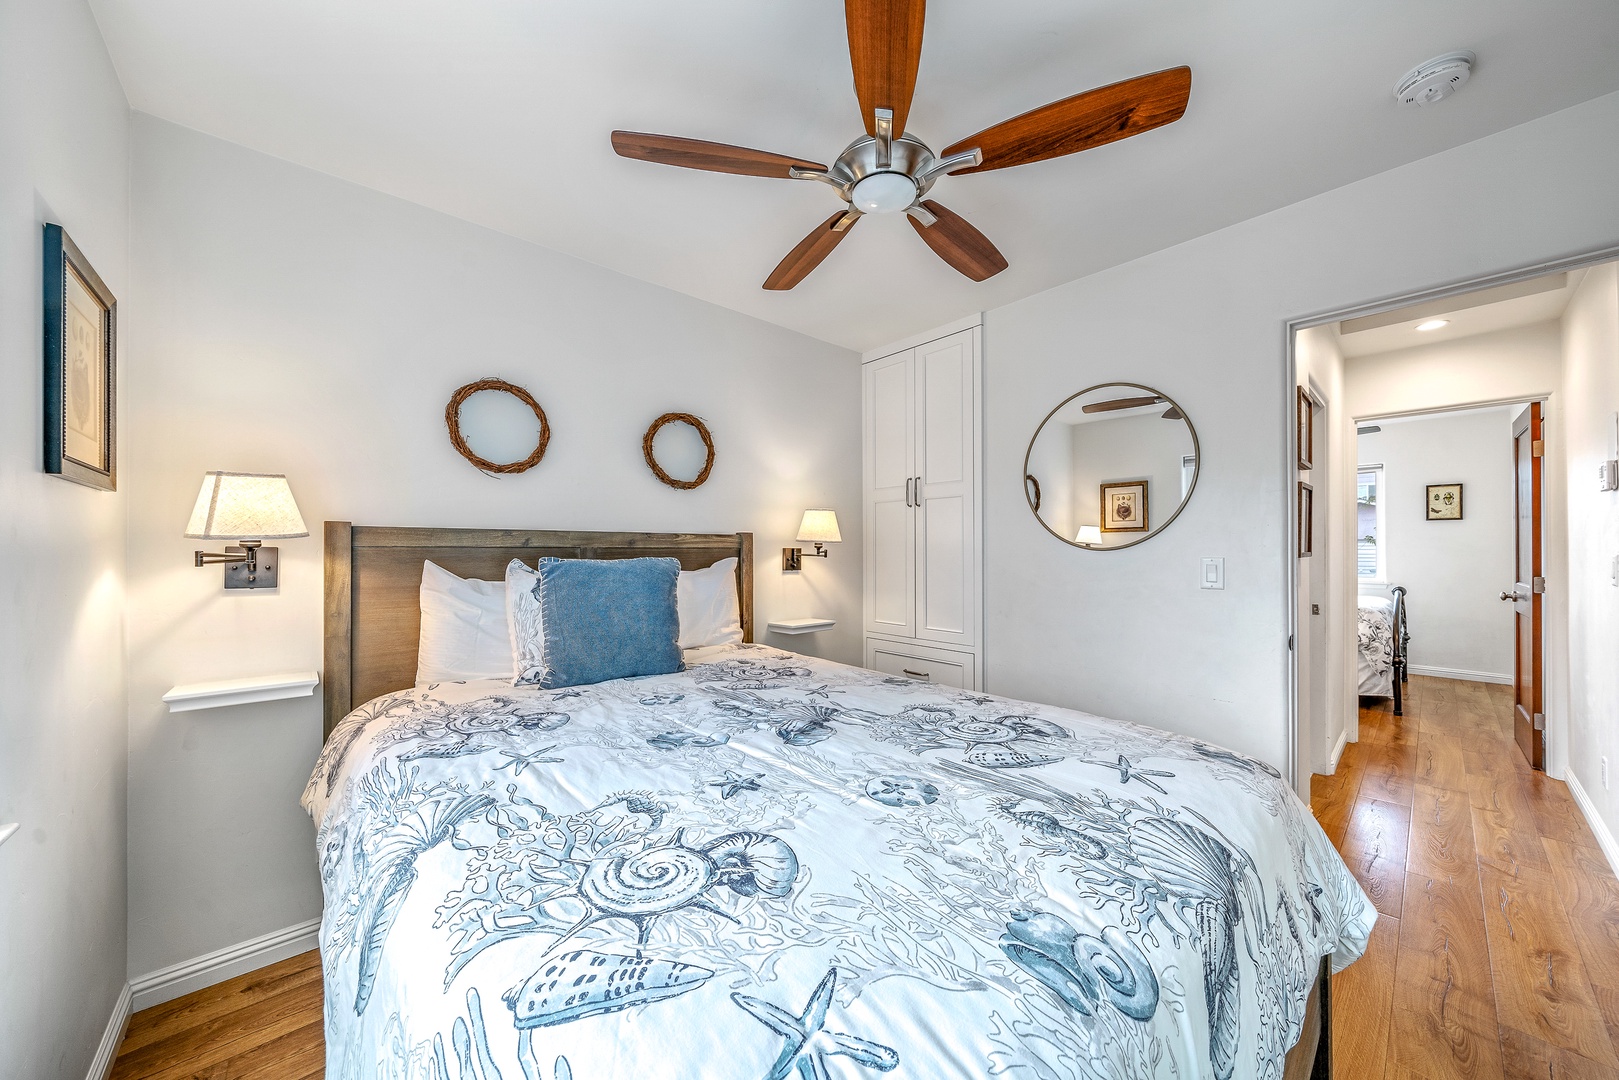 The 1st of 2 bedrooms offers a comfy queen bed & ceiling fan